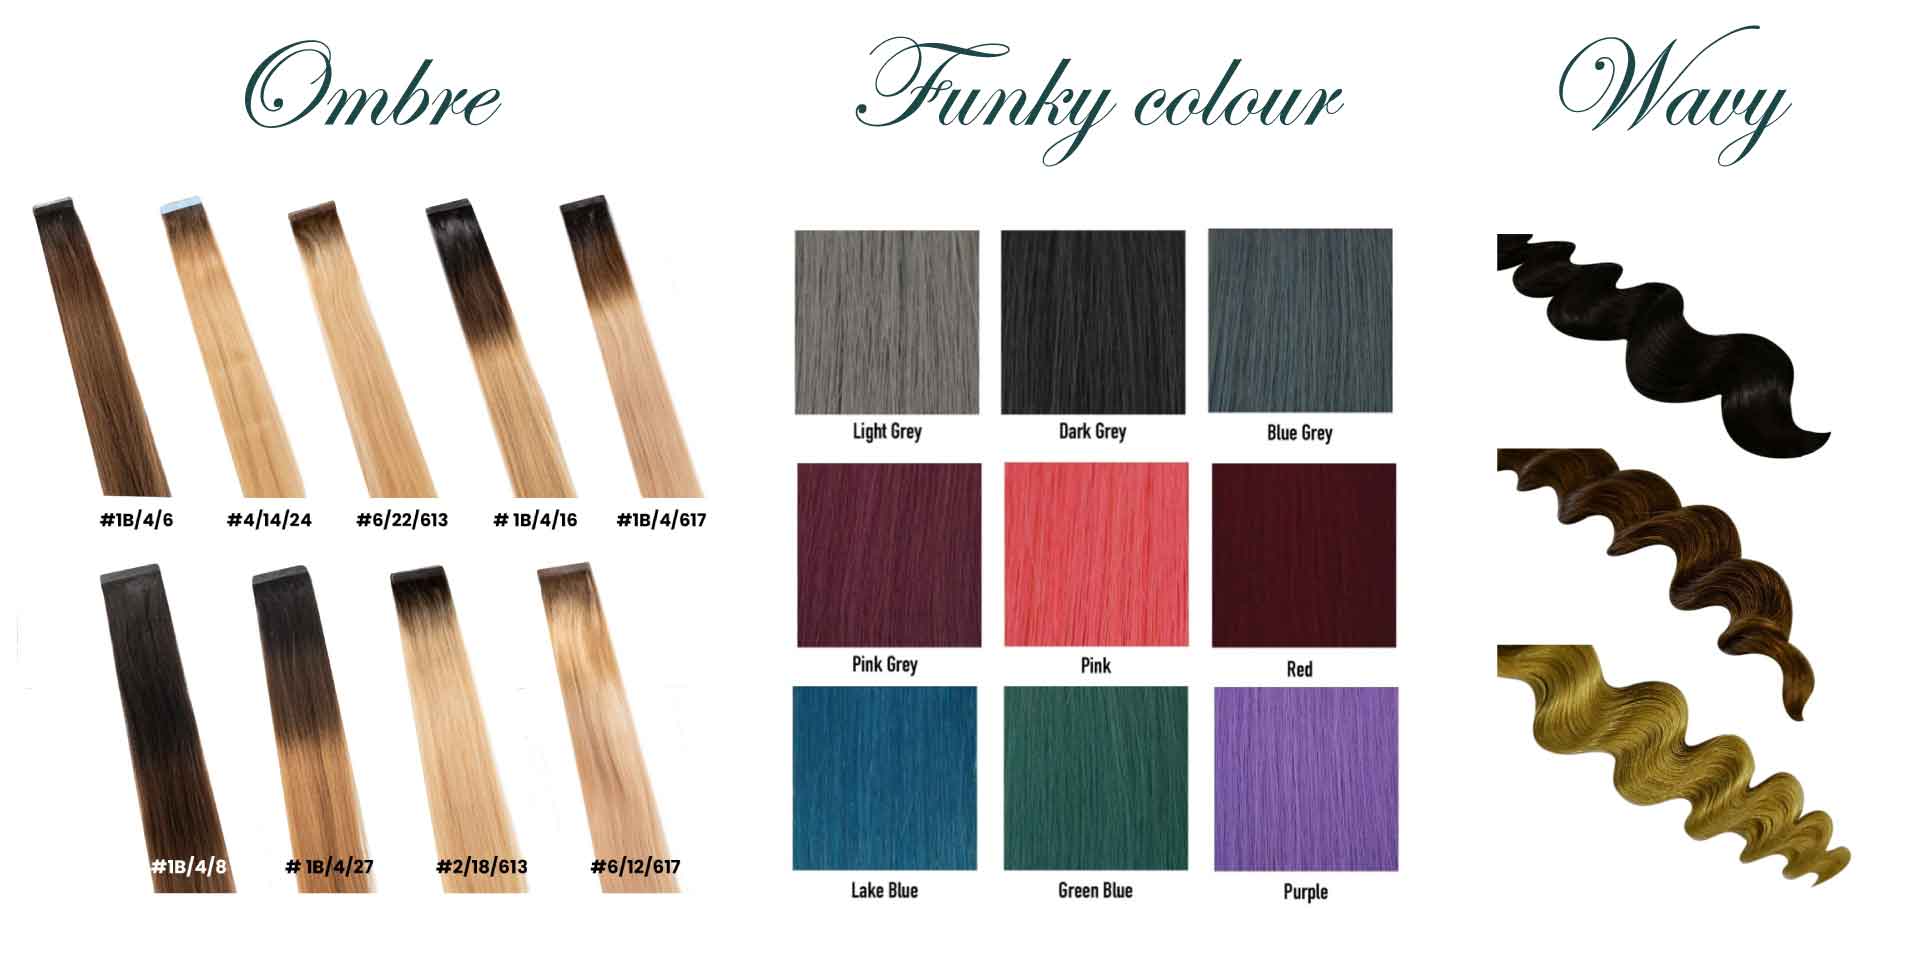 Funky colour hair extensions